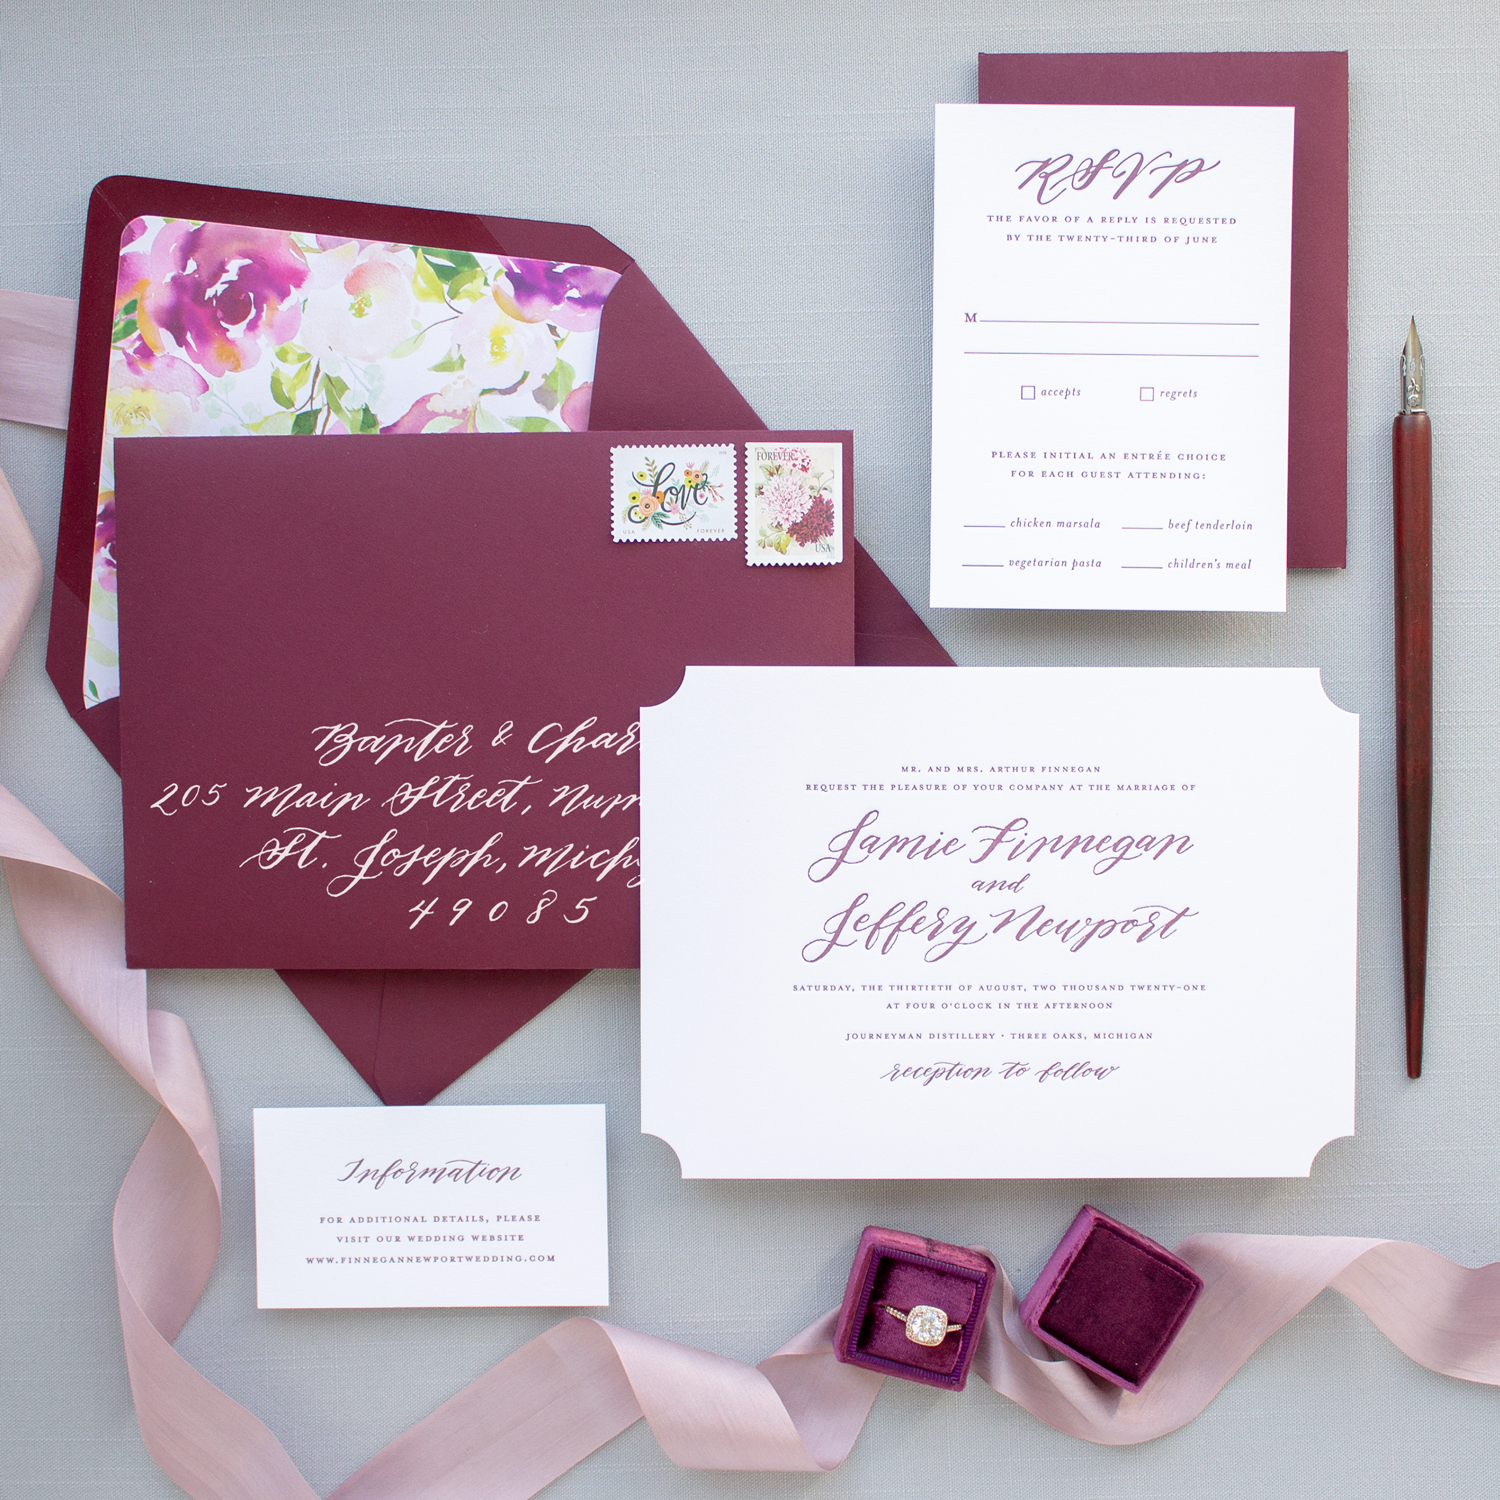 traditional wedding invitations with names in calligraphy